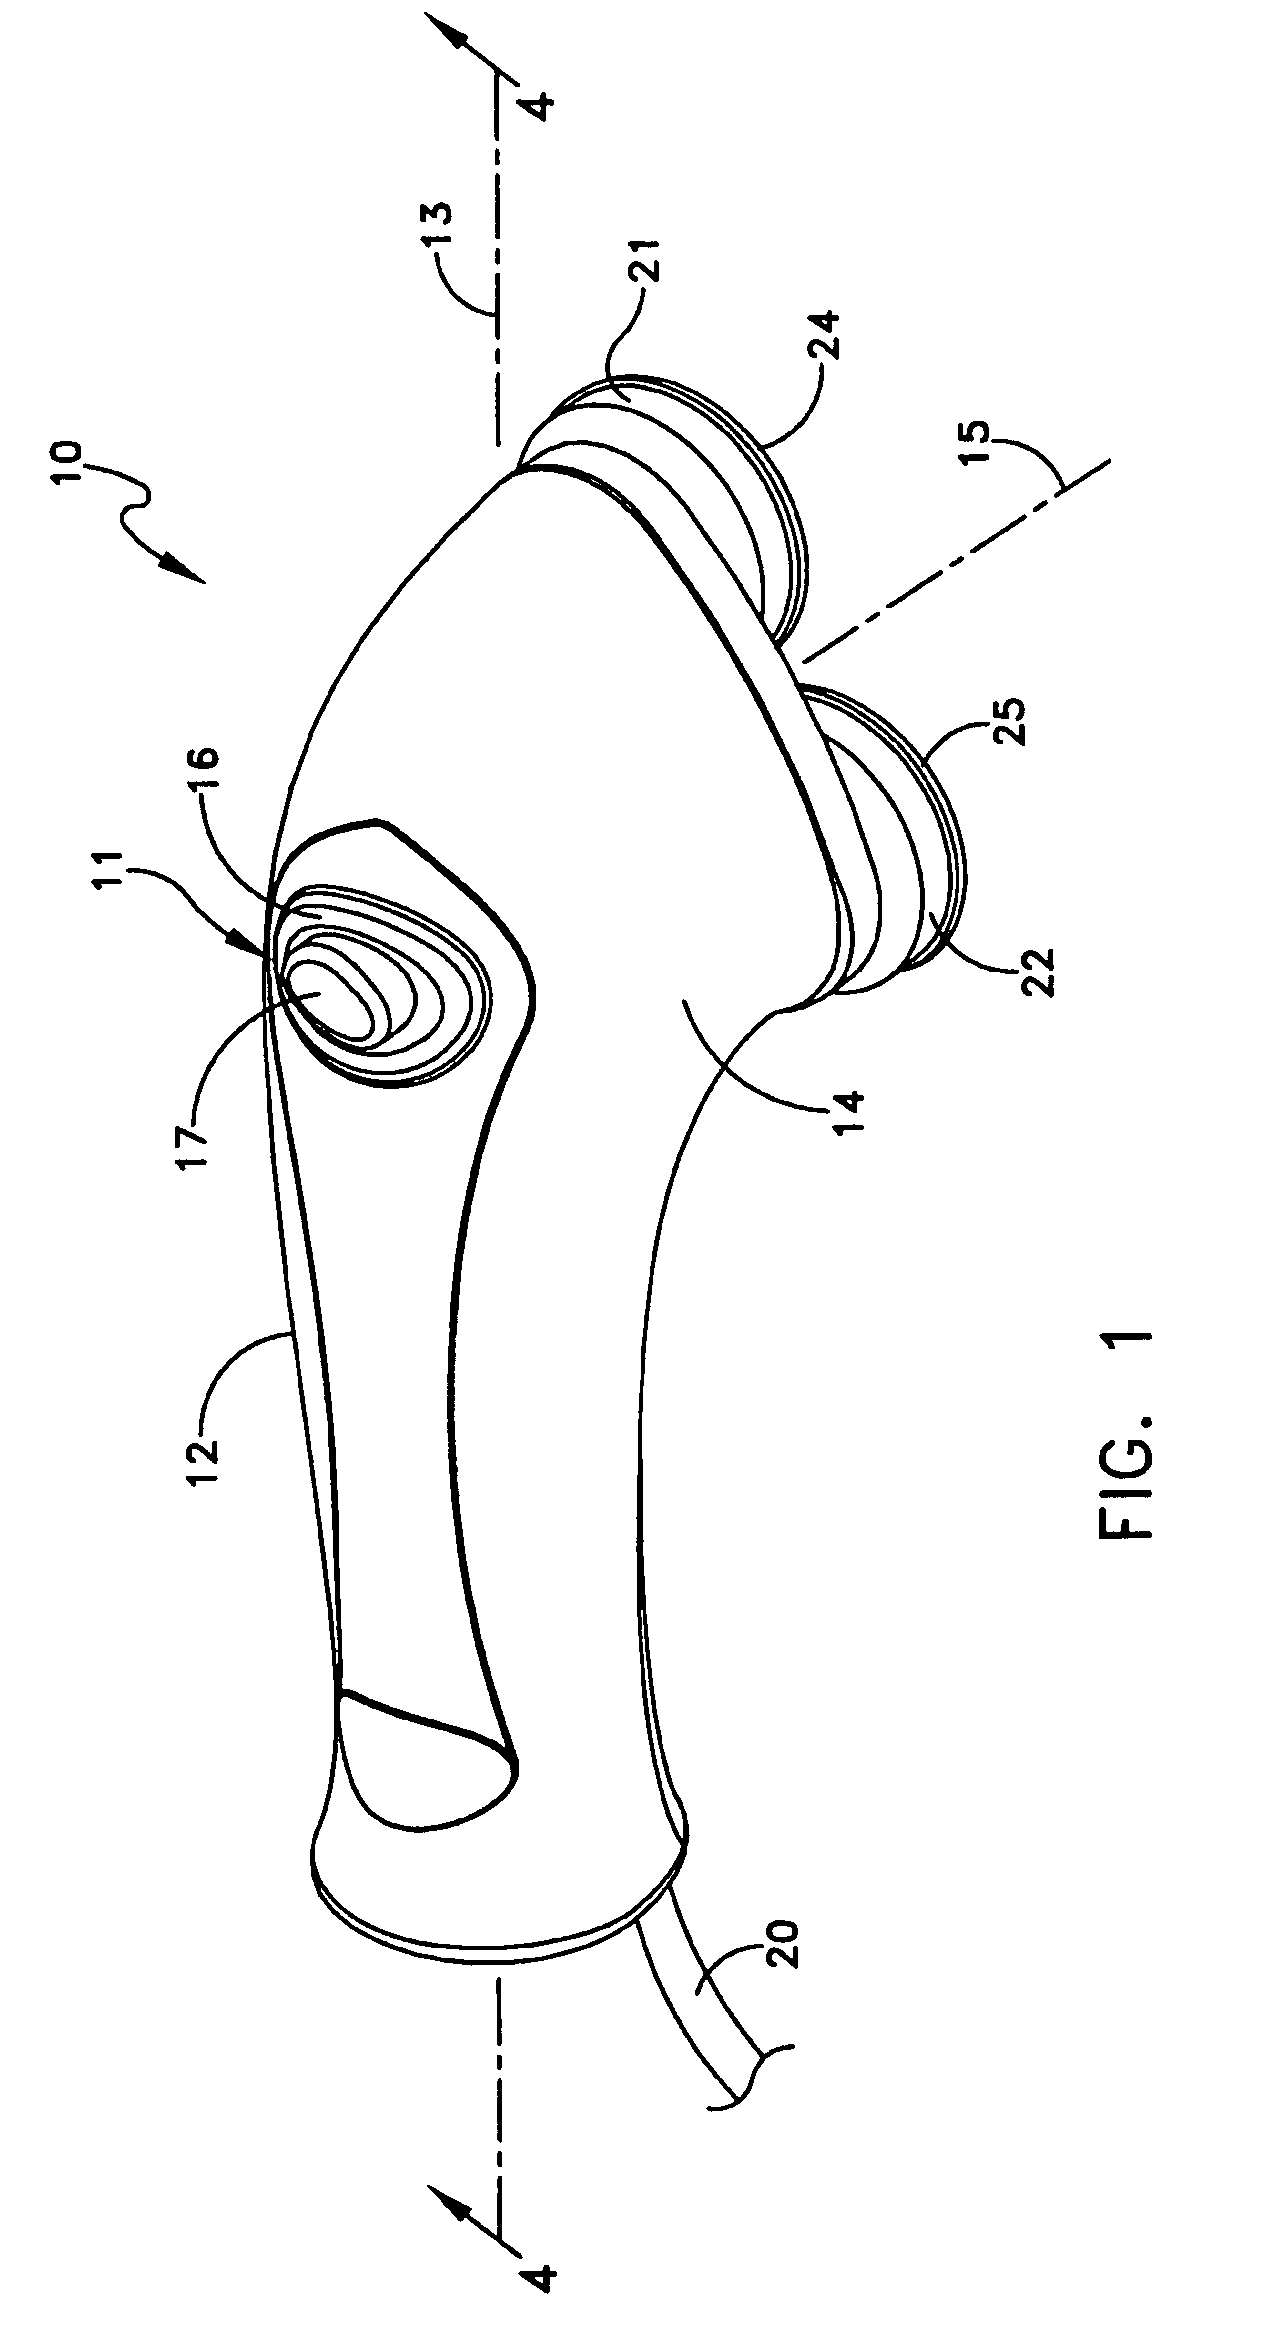 Apparatus for abrading hair and exfoliating skin